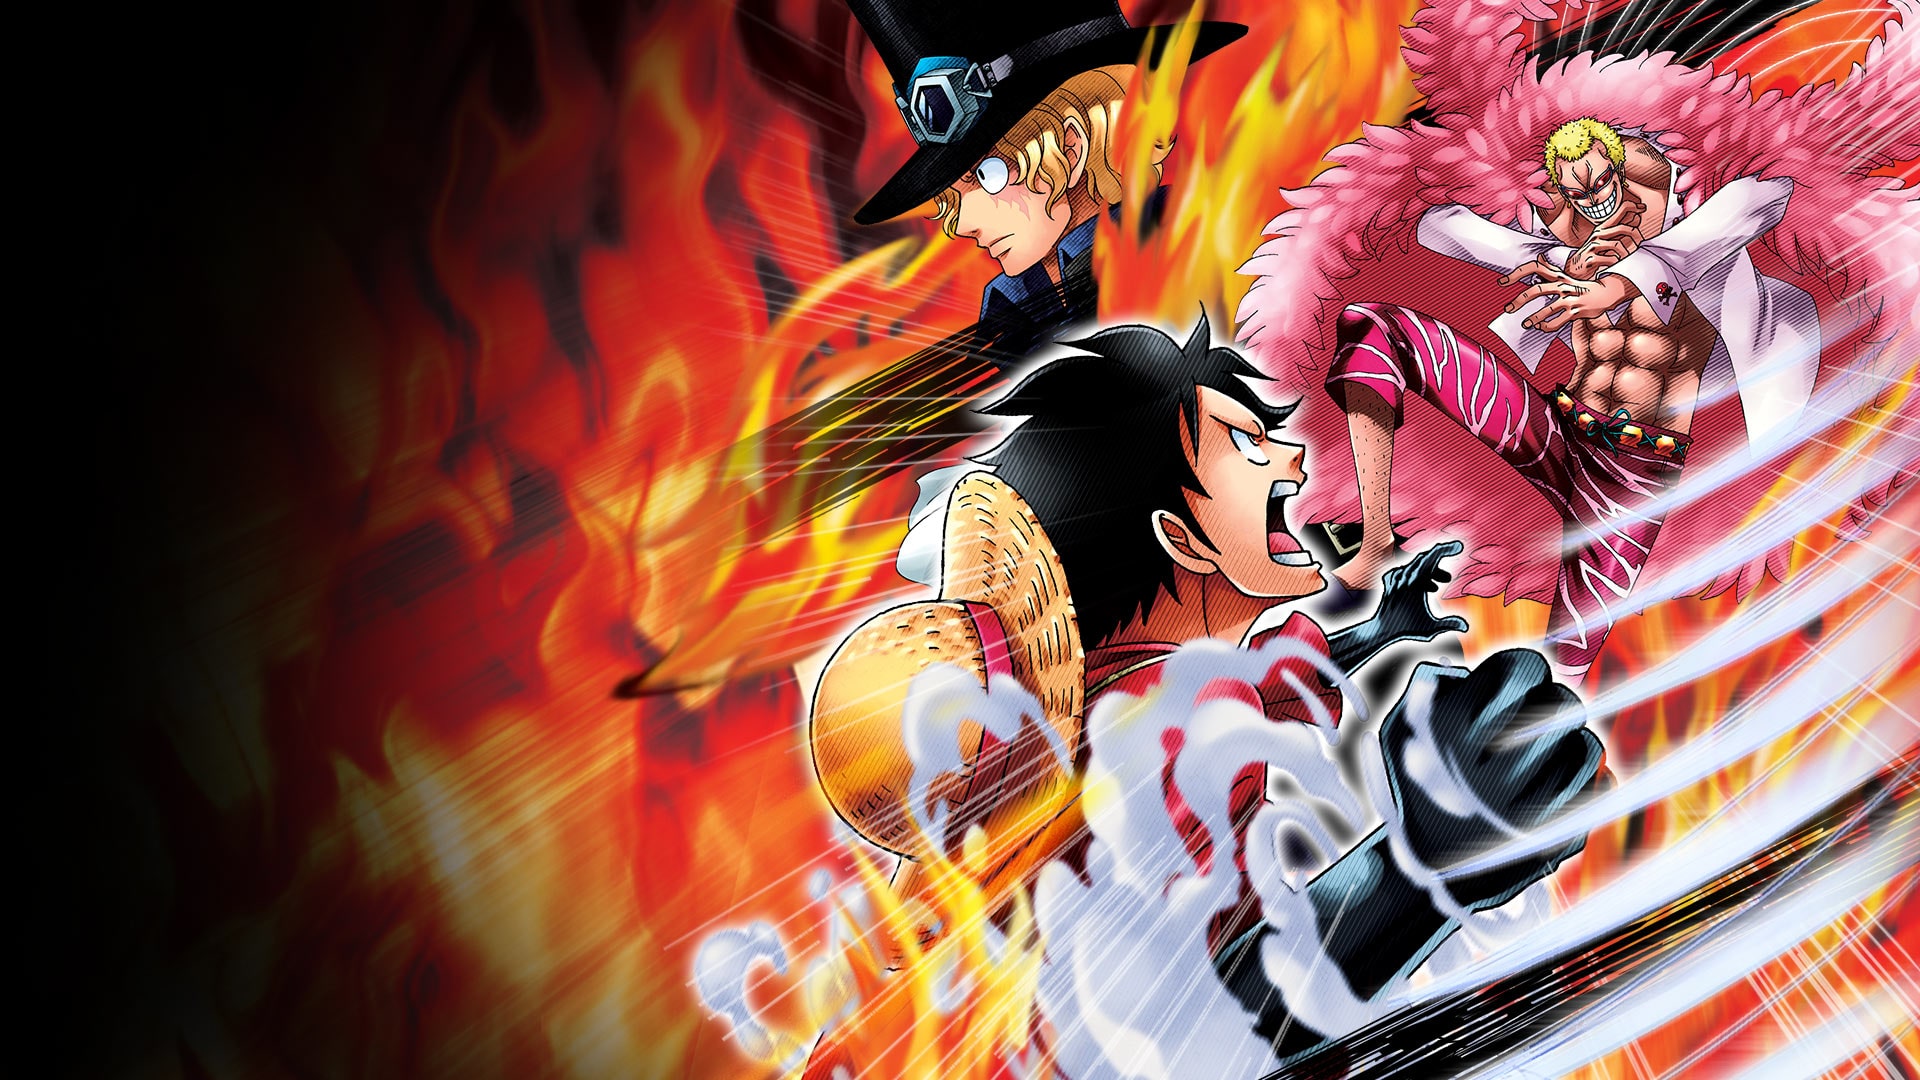 One Piece: Burning Blood Costume Pack